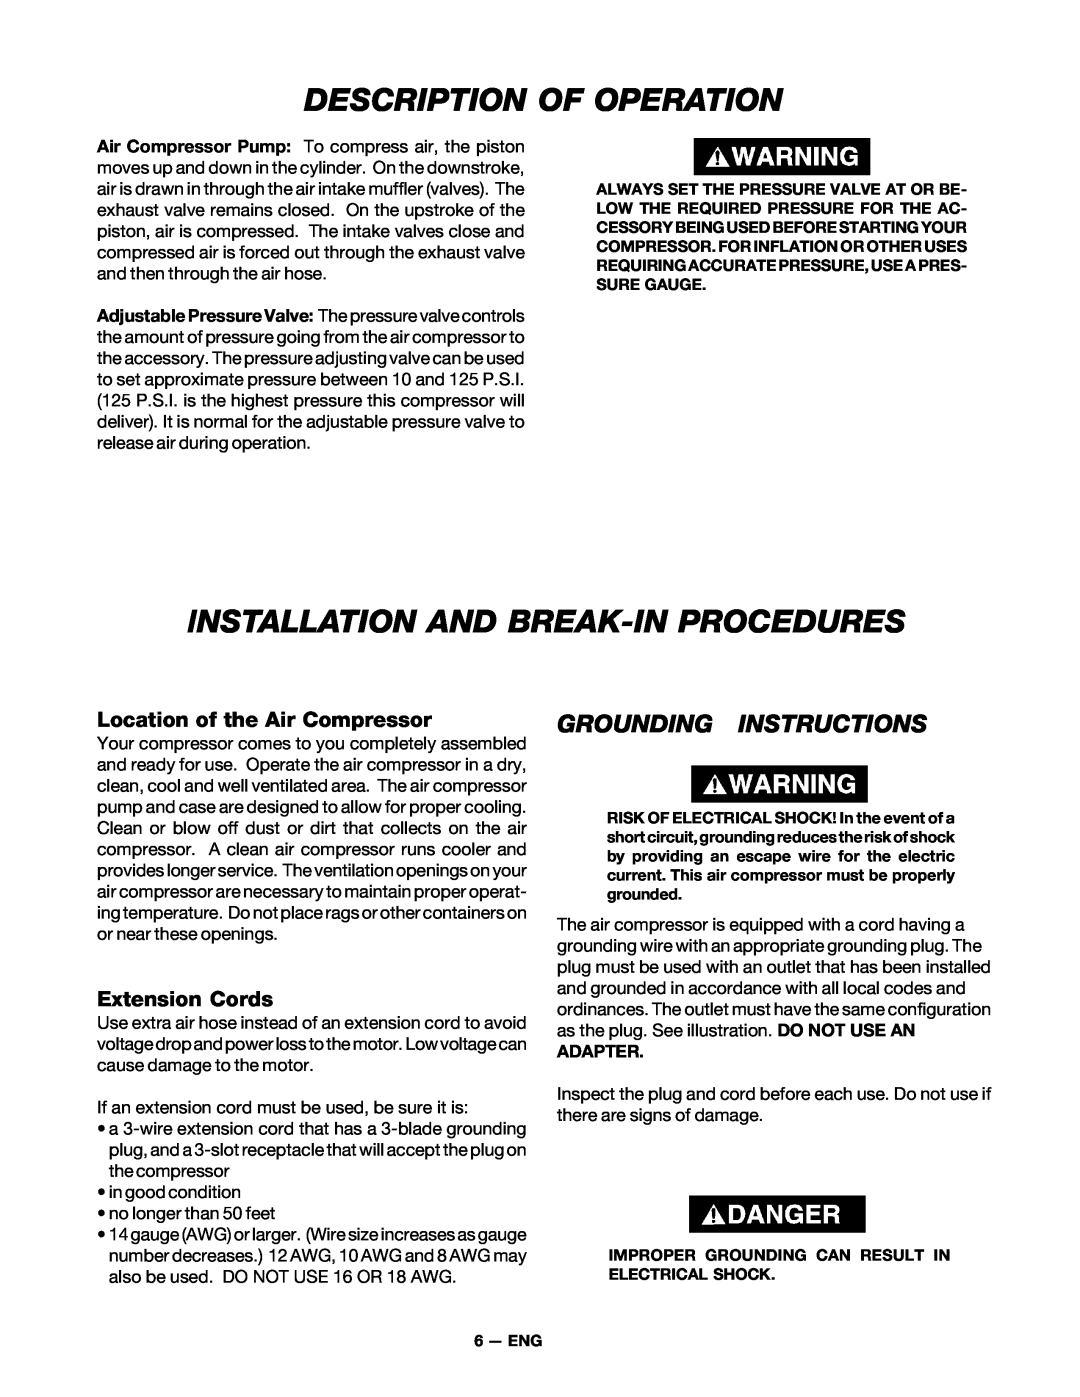 DeVillbiss Air Power Company SP-100-E Description Of Operation, Installation And Break-In Procedures, Extension Cords 